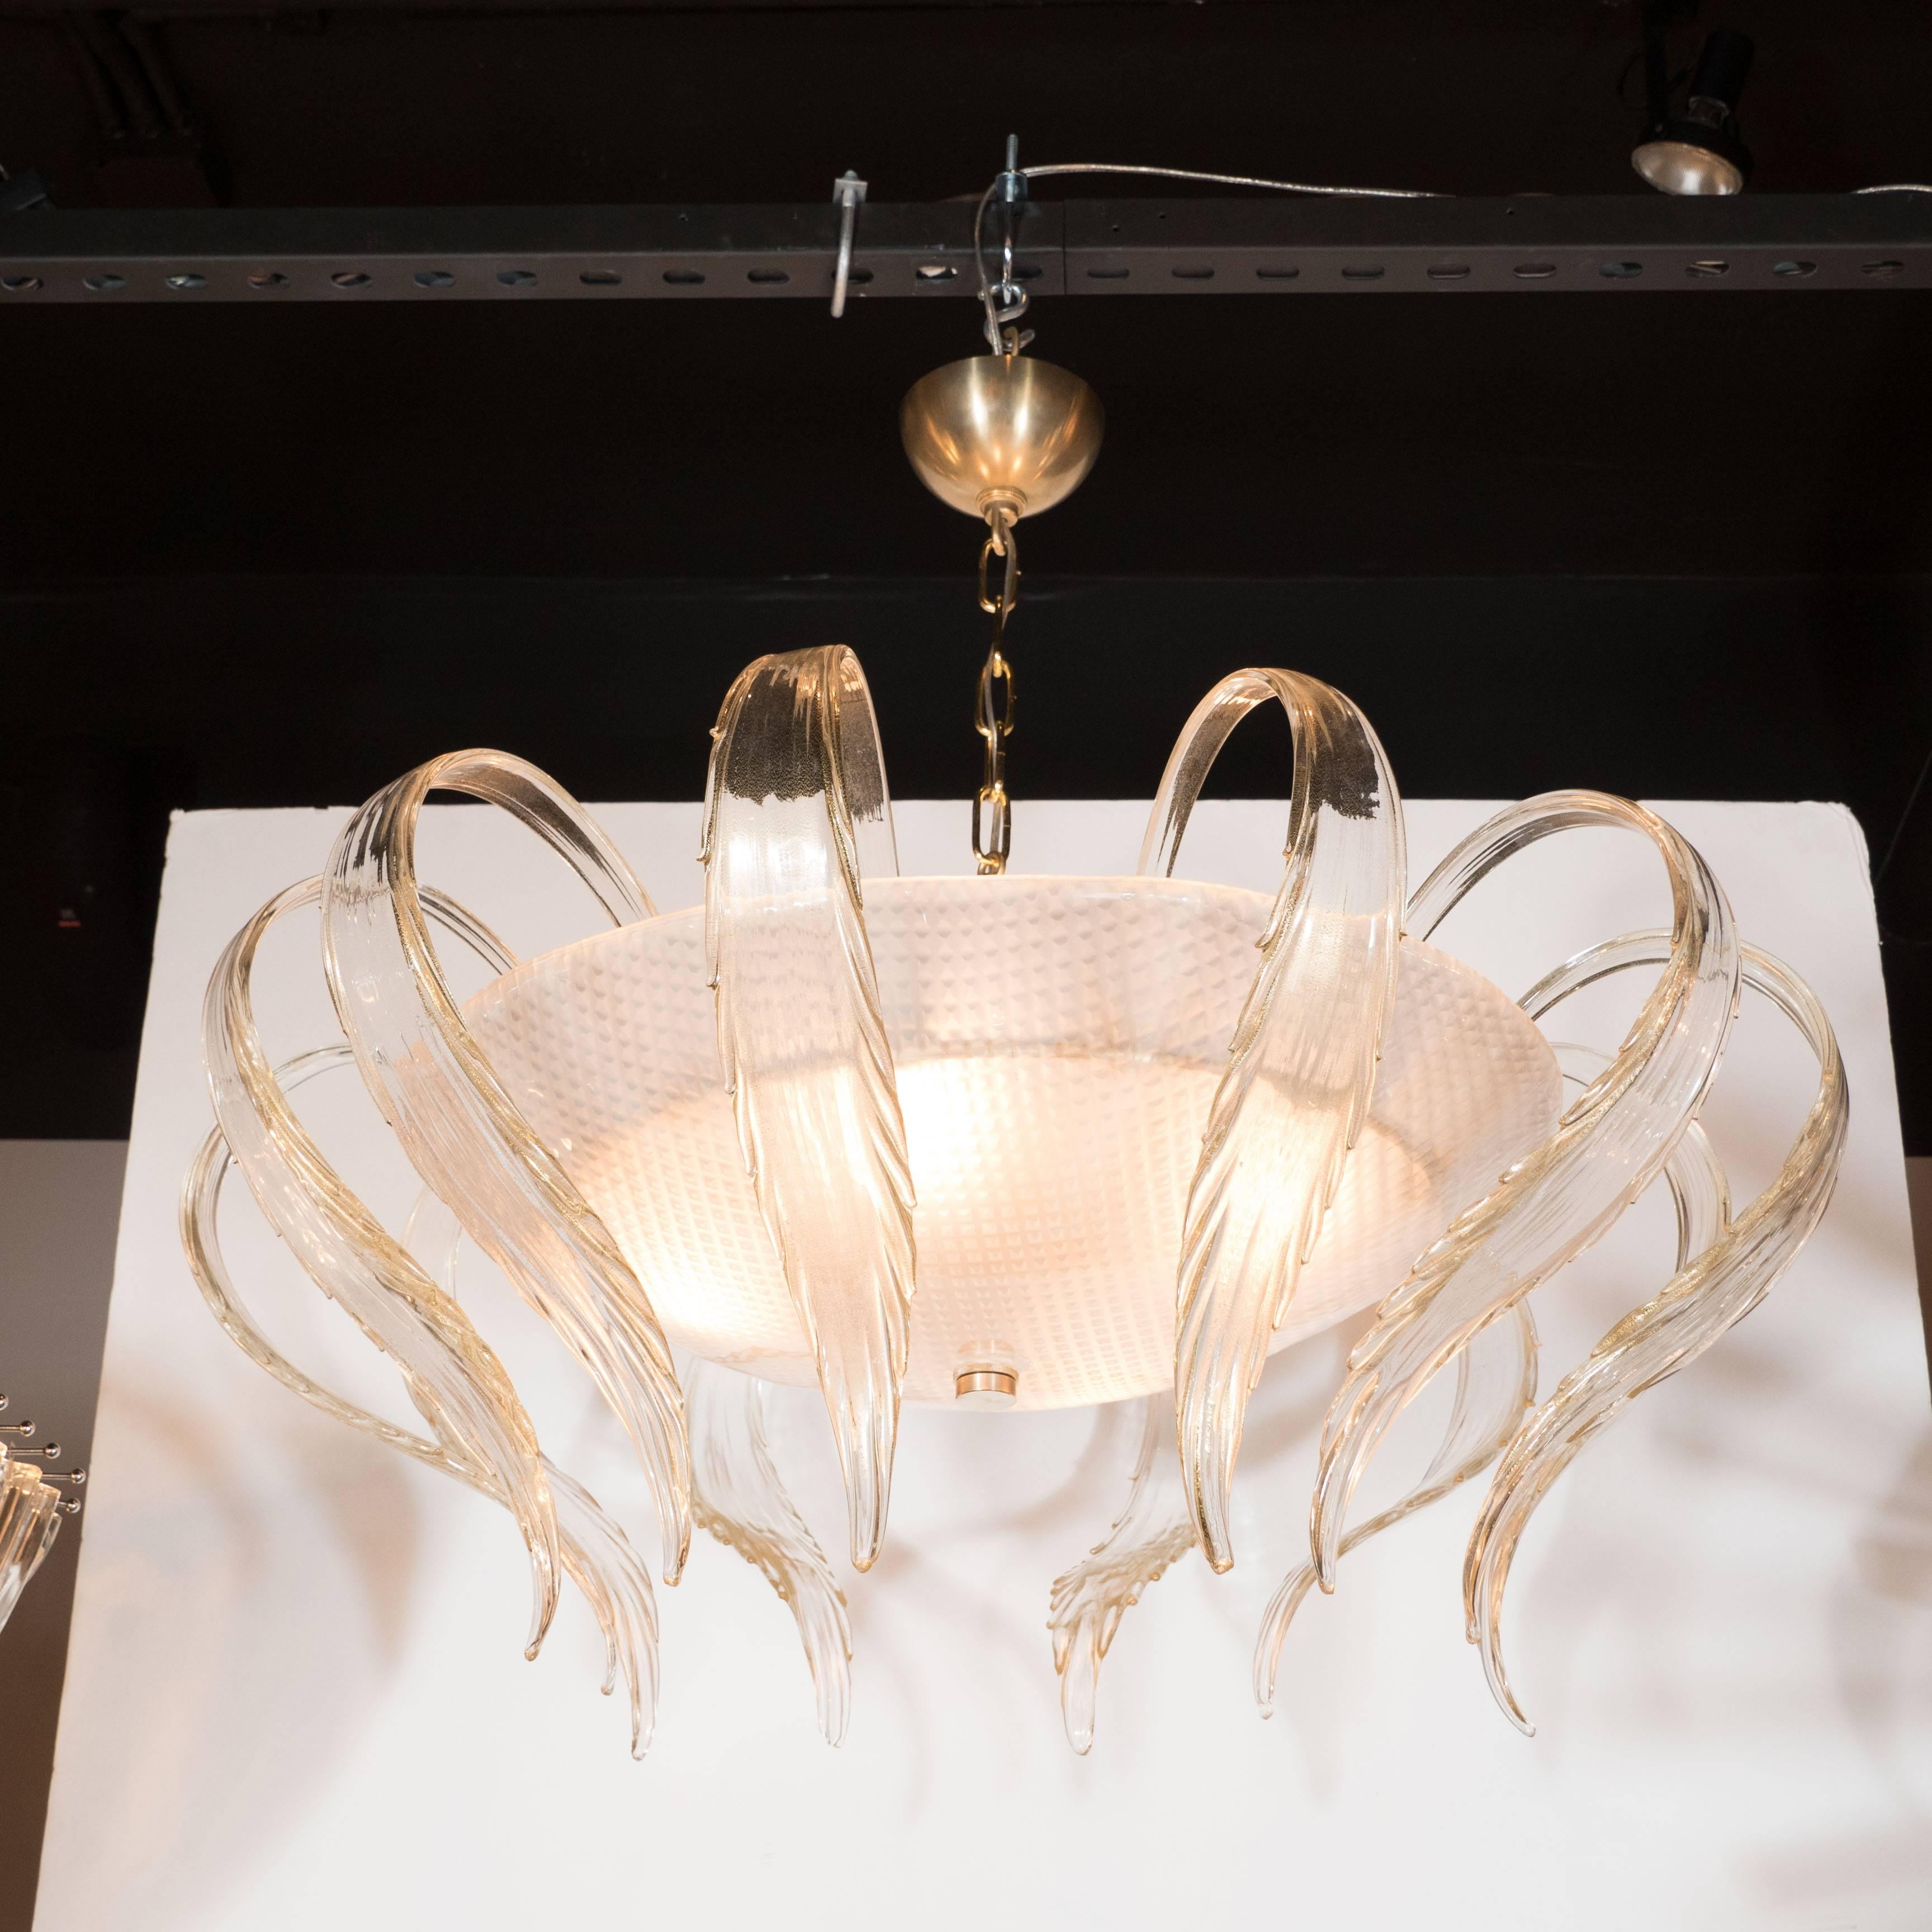 Brass Art Deco Textured Murano Glass Chandelier with Scrolled Feather Detail